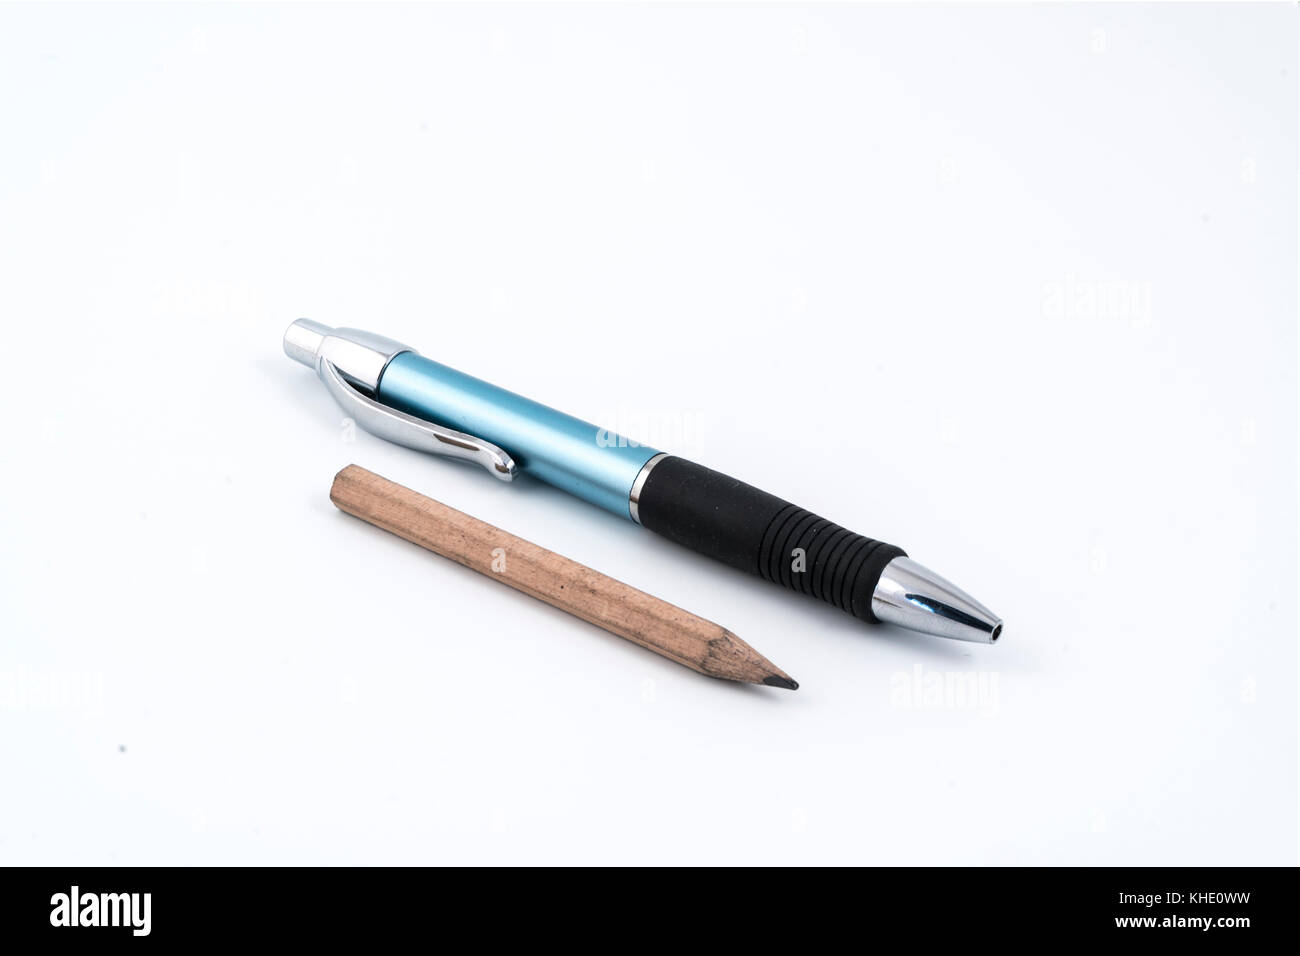 a ballpoint pen and a pencil on a white background Stock Photo